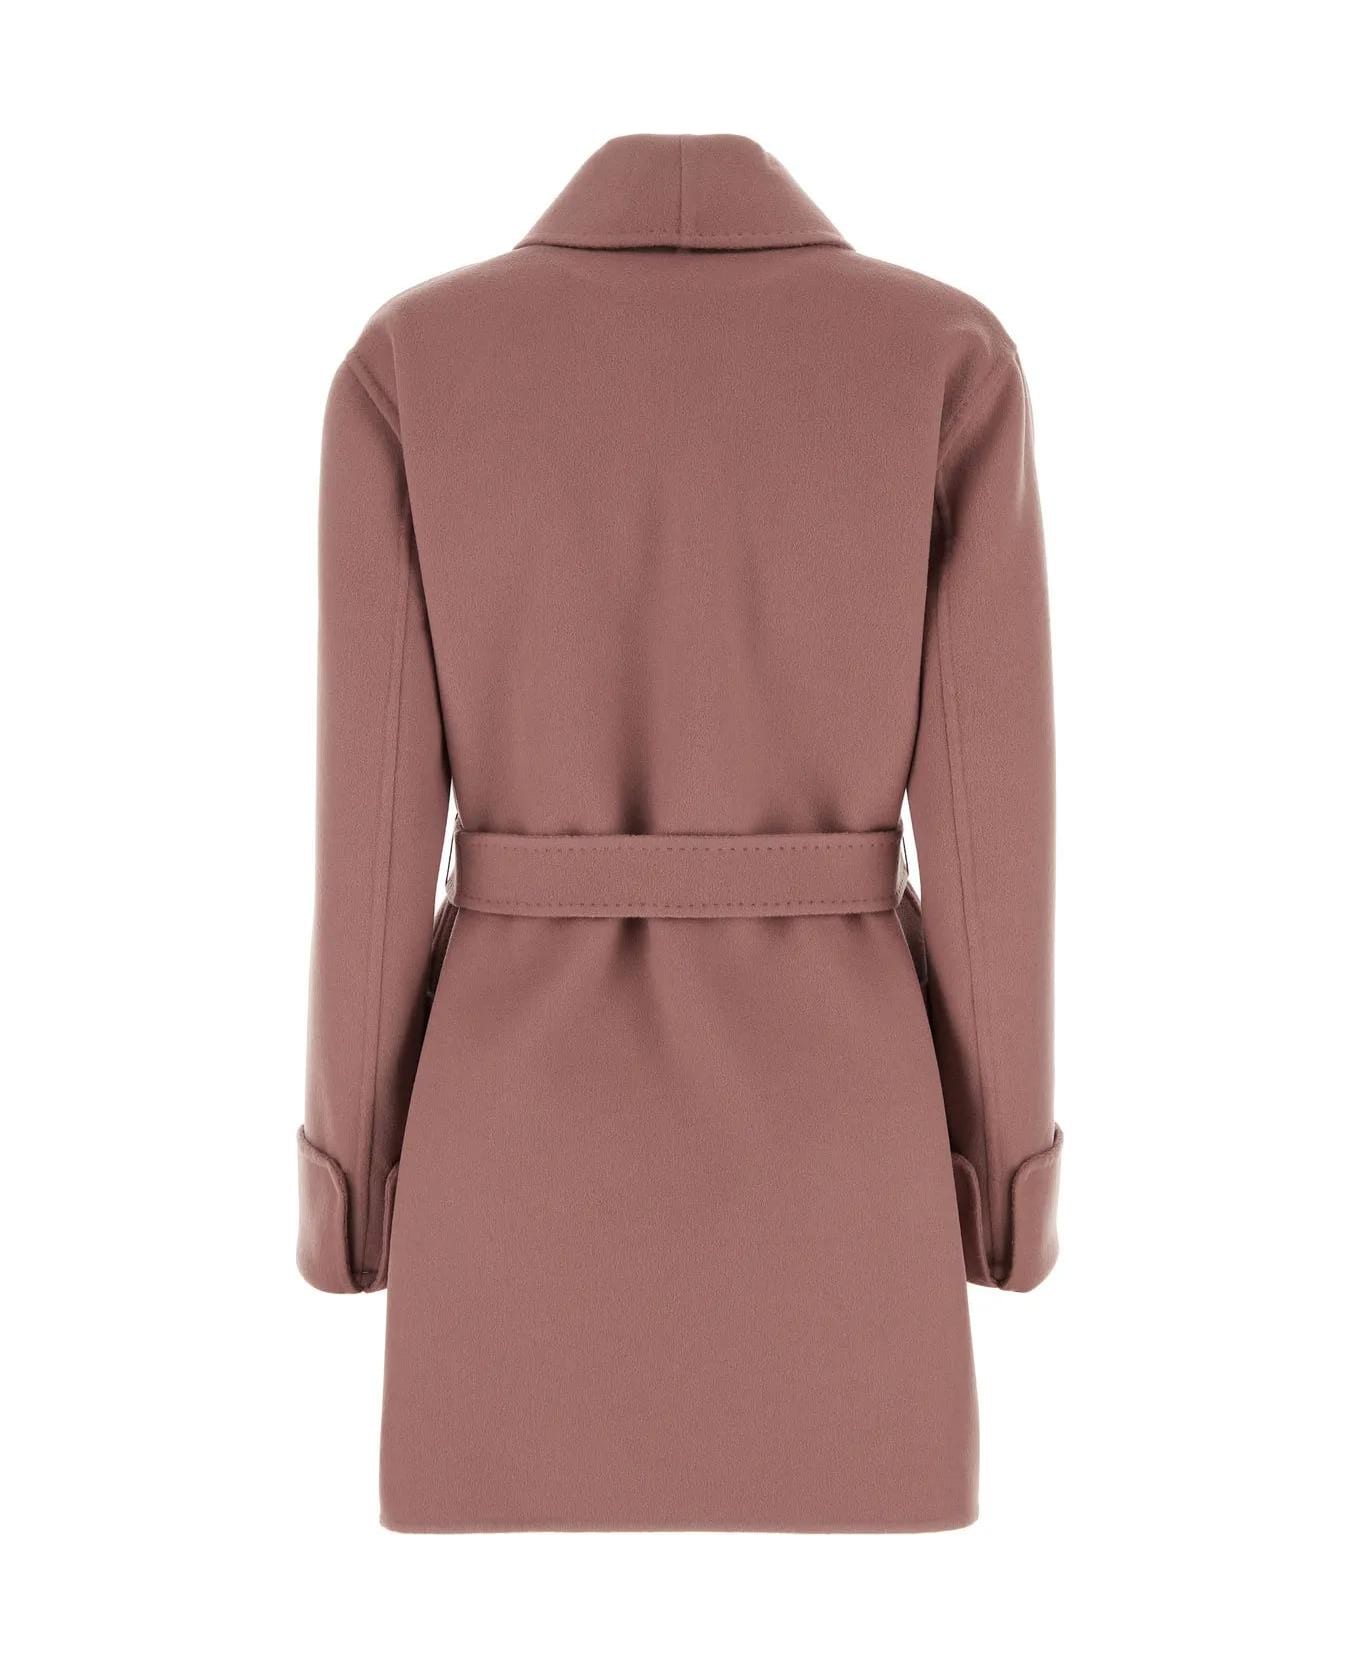 Max Mara Deconstructed Jacket In Wool And Cashmere - ROSA